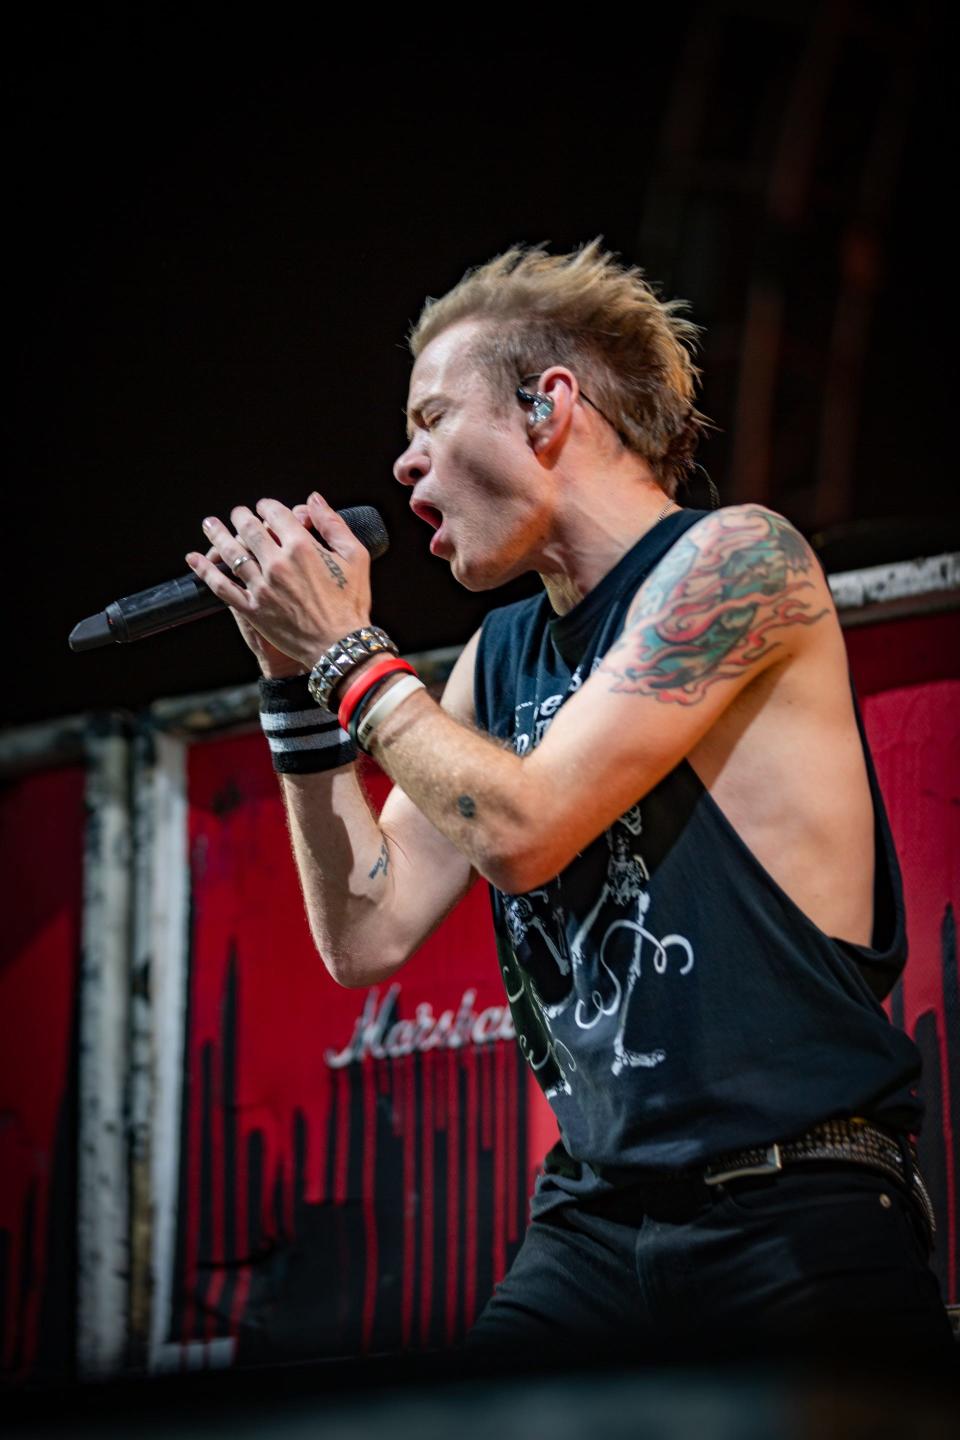 Deryck Whibley surprised many when announcing Sum 41 will play its farewell tour next year.